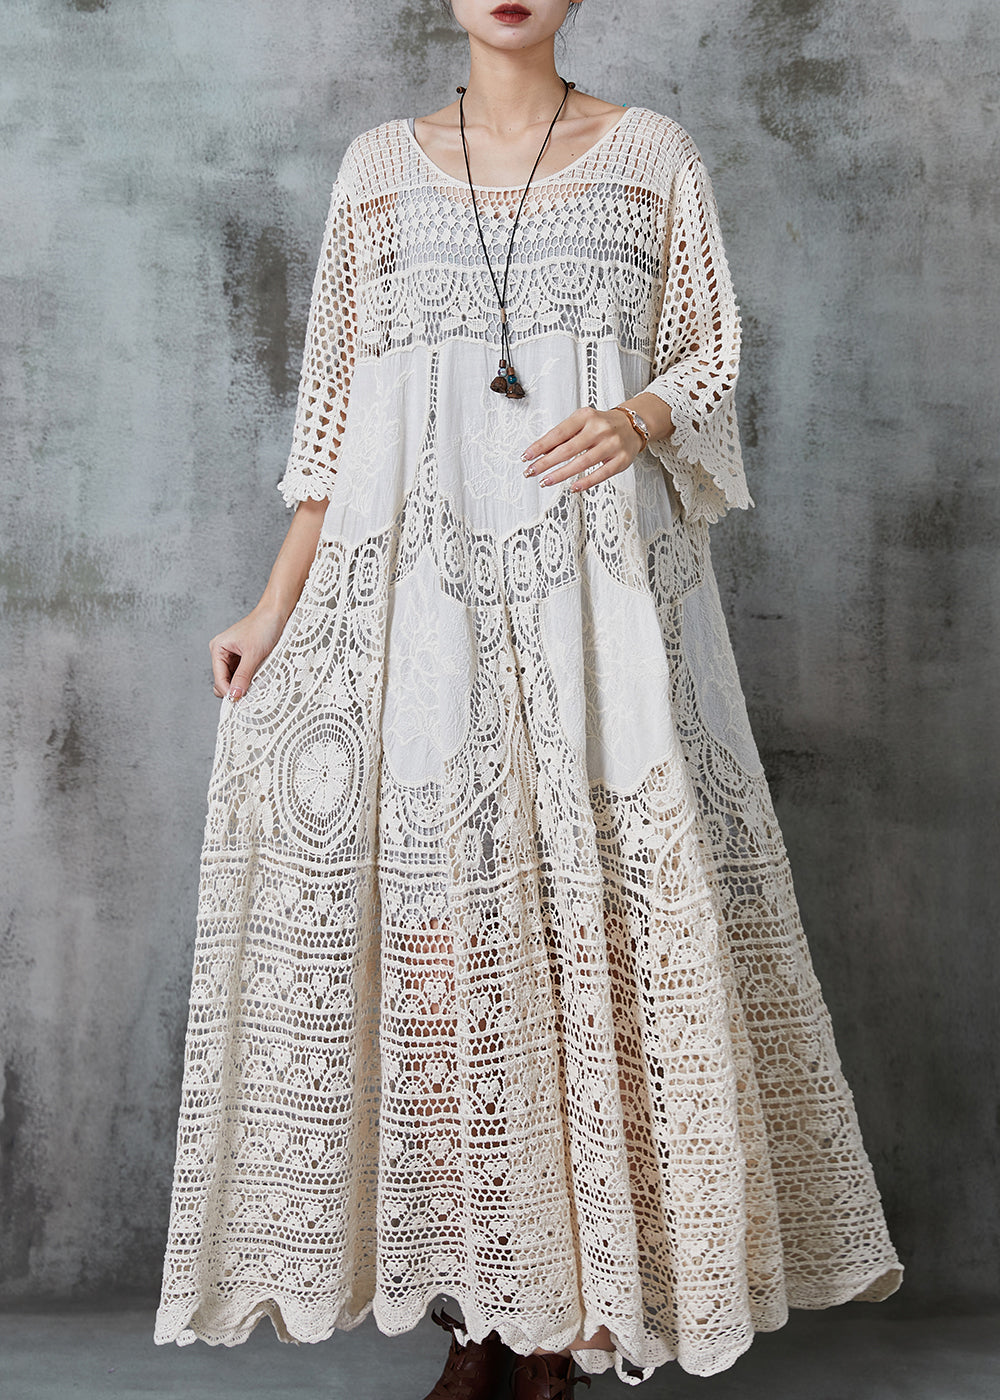 Apricot Hollow Out Cotton Long Dress Oversized Summer